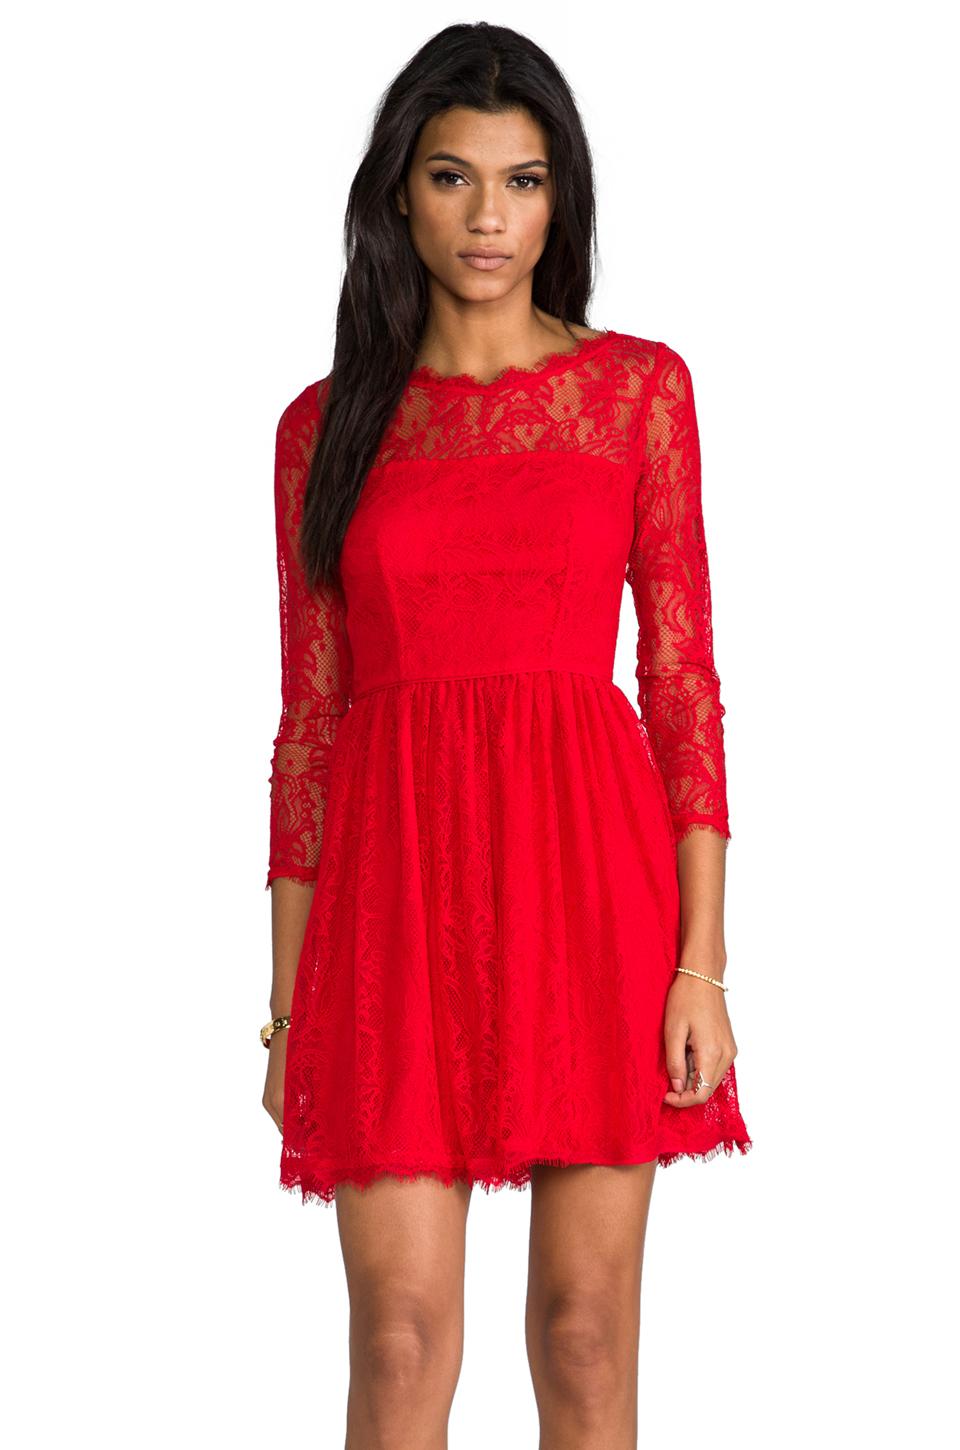 Lyst - Juicy Couture Delicate Lace Dress in Red